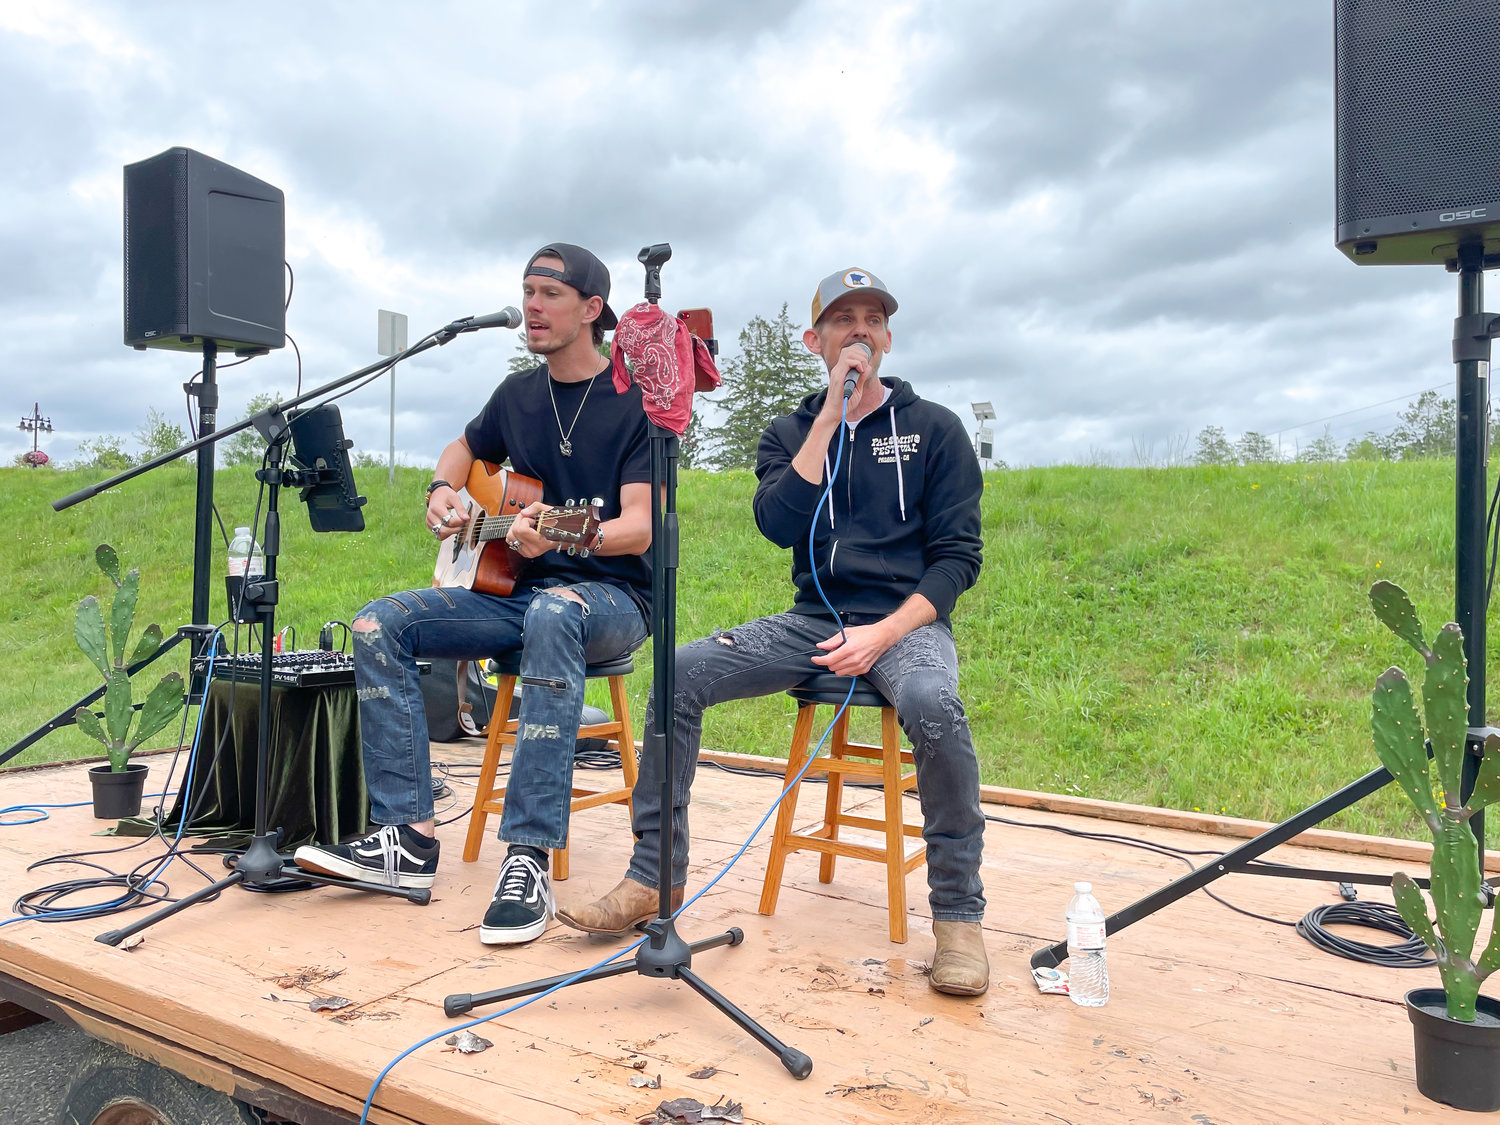 Kelly Kidd and Mike Kindel performed a wide selection of both well-known and original country songs during an outdoor concert at the MarJo Motel in Tower on Aug. 4.